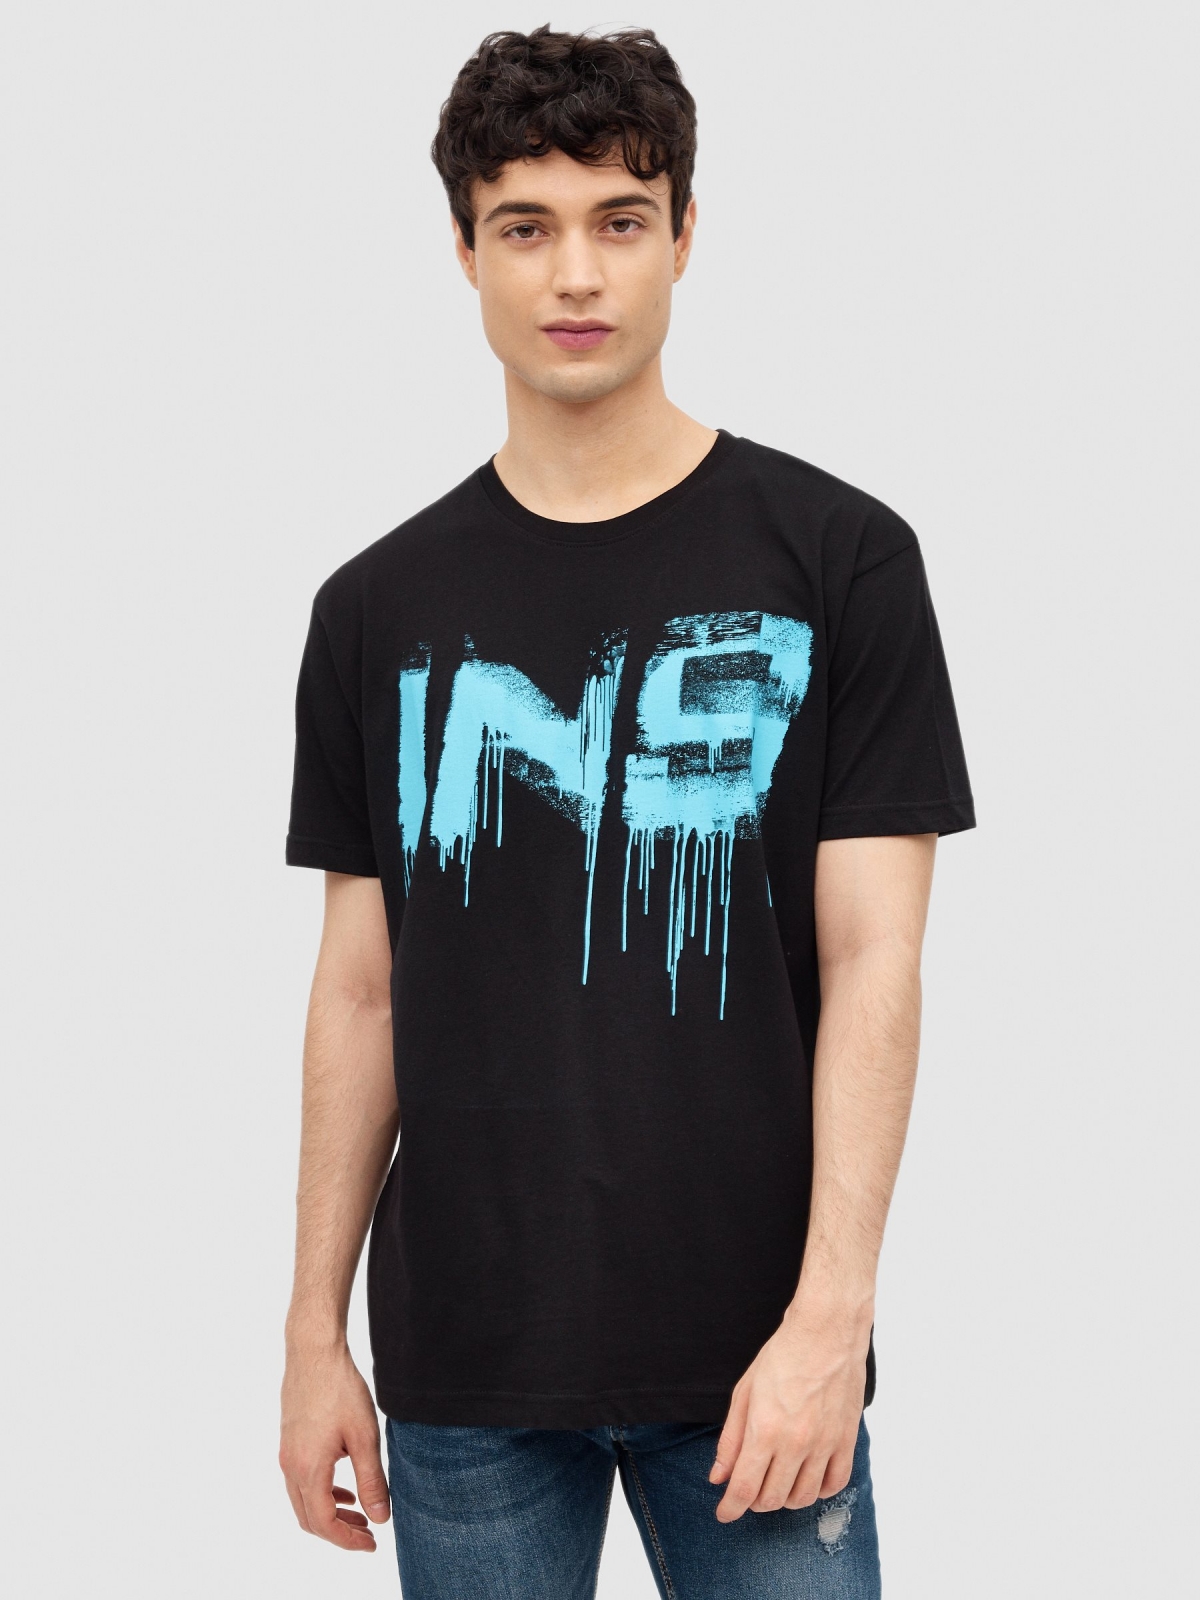 INSIDE spray T-shirt black middle front view